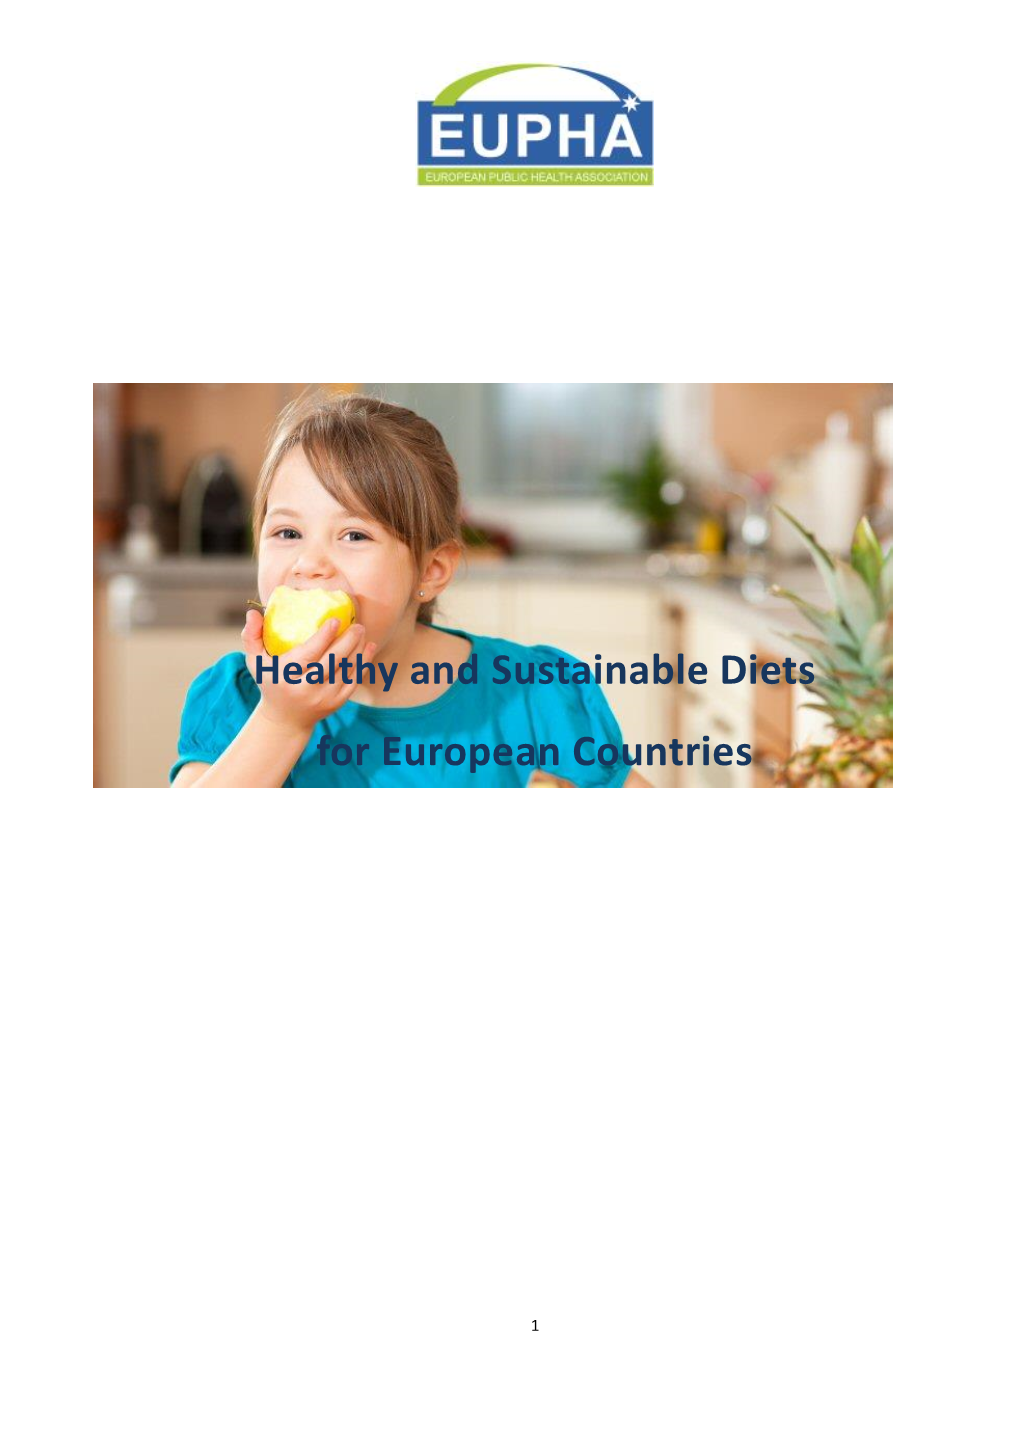 Healthy and Sustainable Diets for European Countries